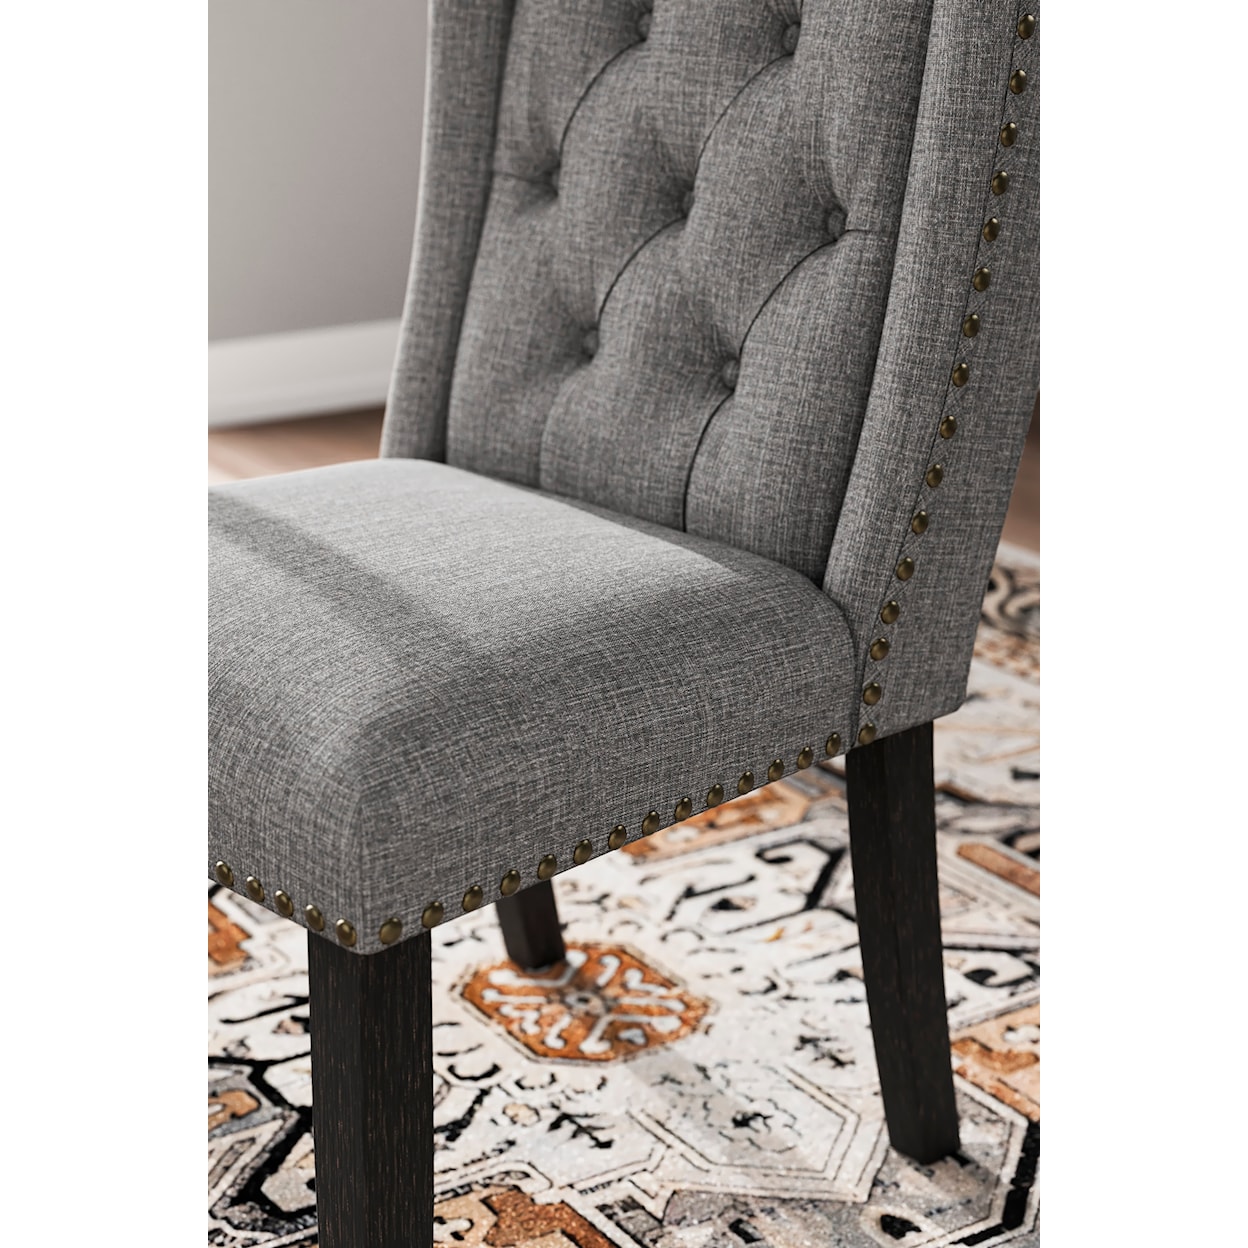 Michael Alan Select Jeanette Dining Chair